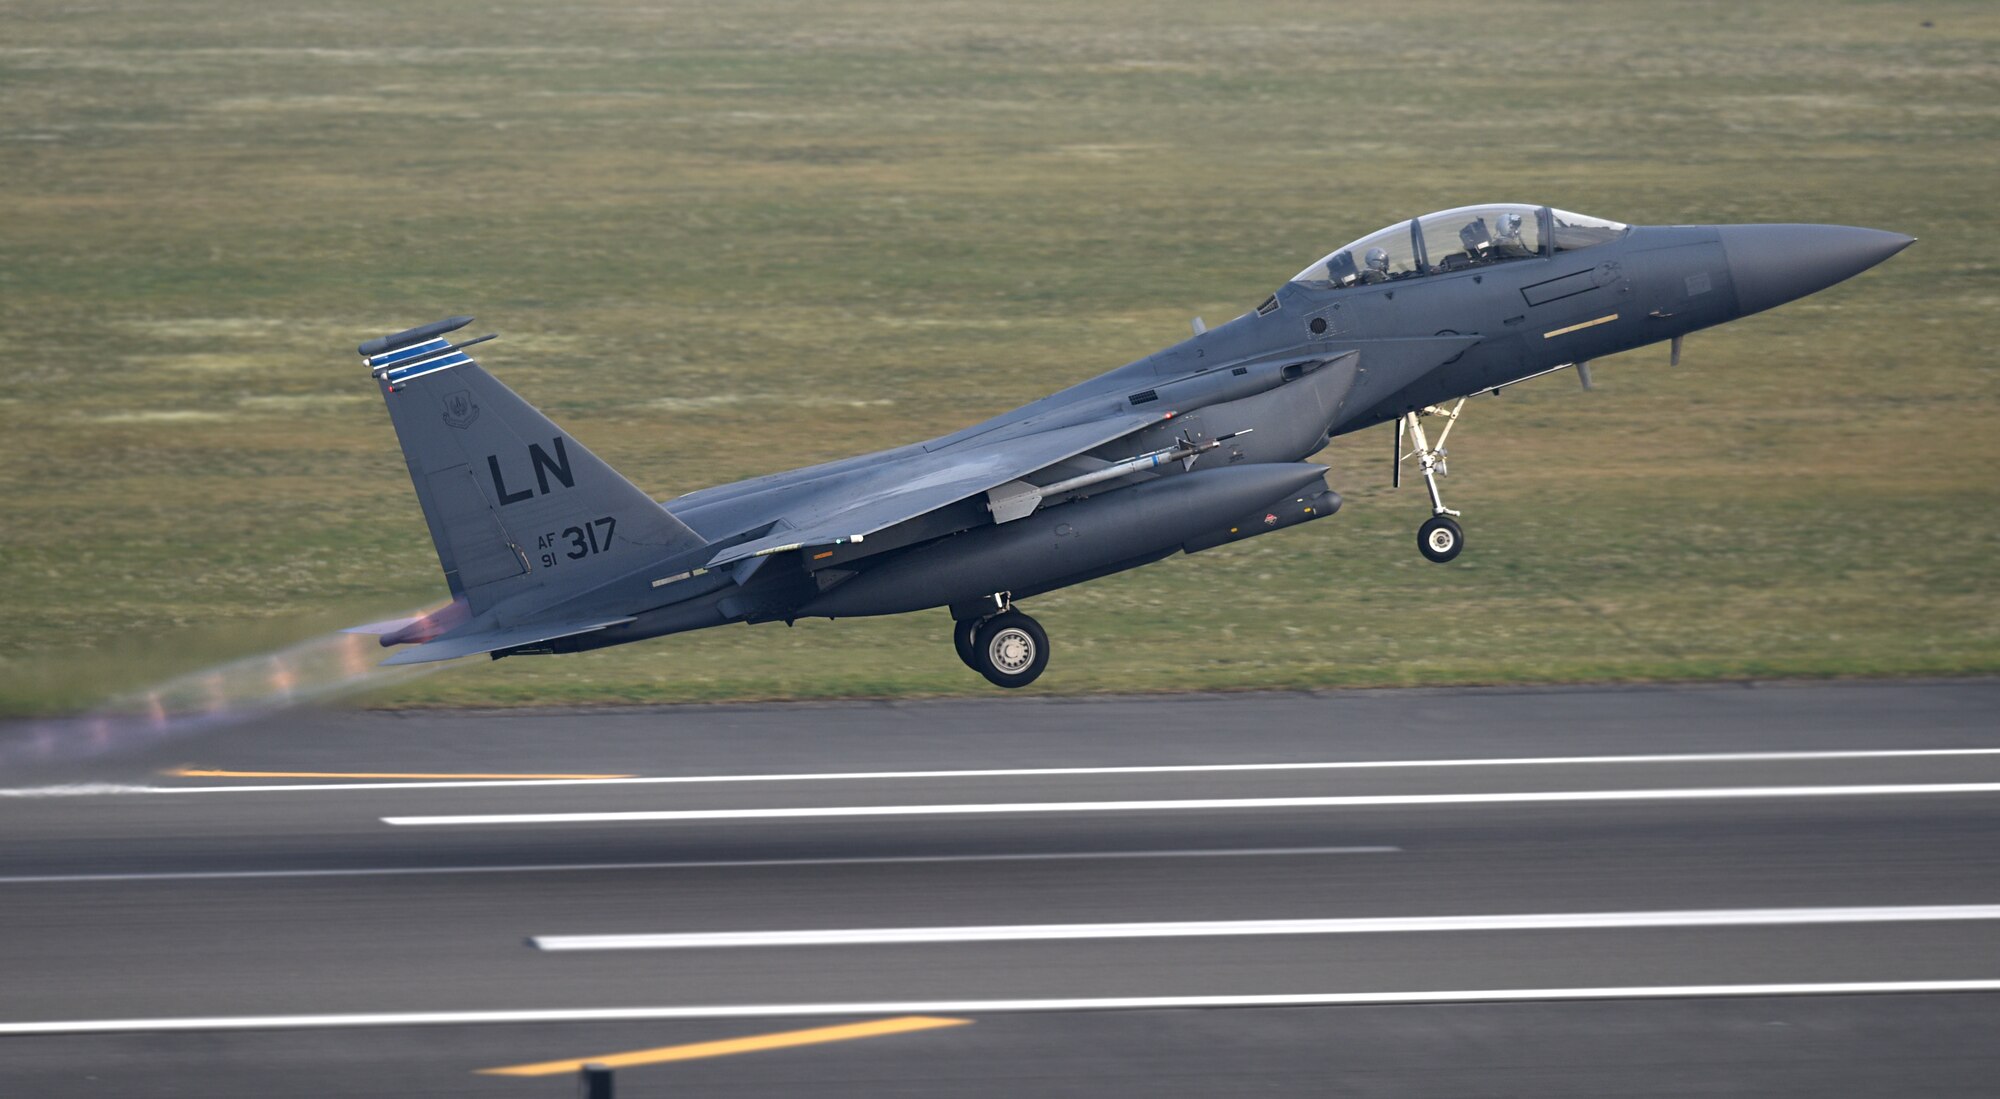 An F-15E Strike Eagle assigned to the 492nd Fighter Squadron takes off from the flight line at Royal Air Force Lakenheath, England, April 24, 2019. The 48th Fighter Wing is participating in a readiness exercise from 23-25 April focused on continuous operations over a 48-hour period. (U.S. Air Force photo by Airman 1st Class Madeline Herzog)